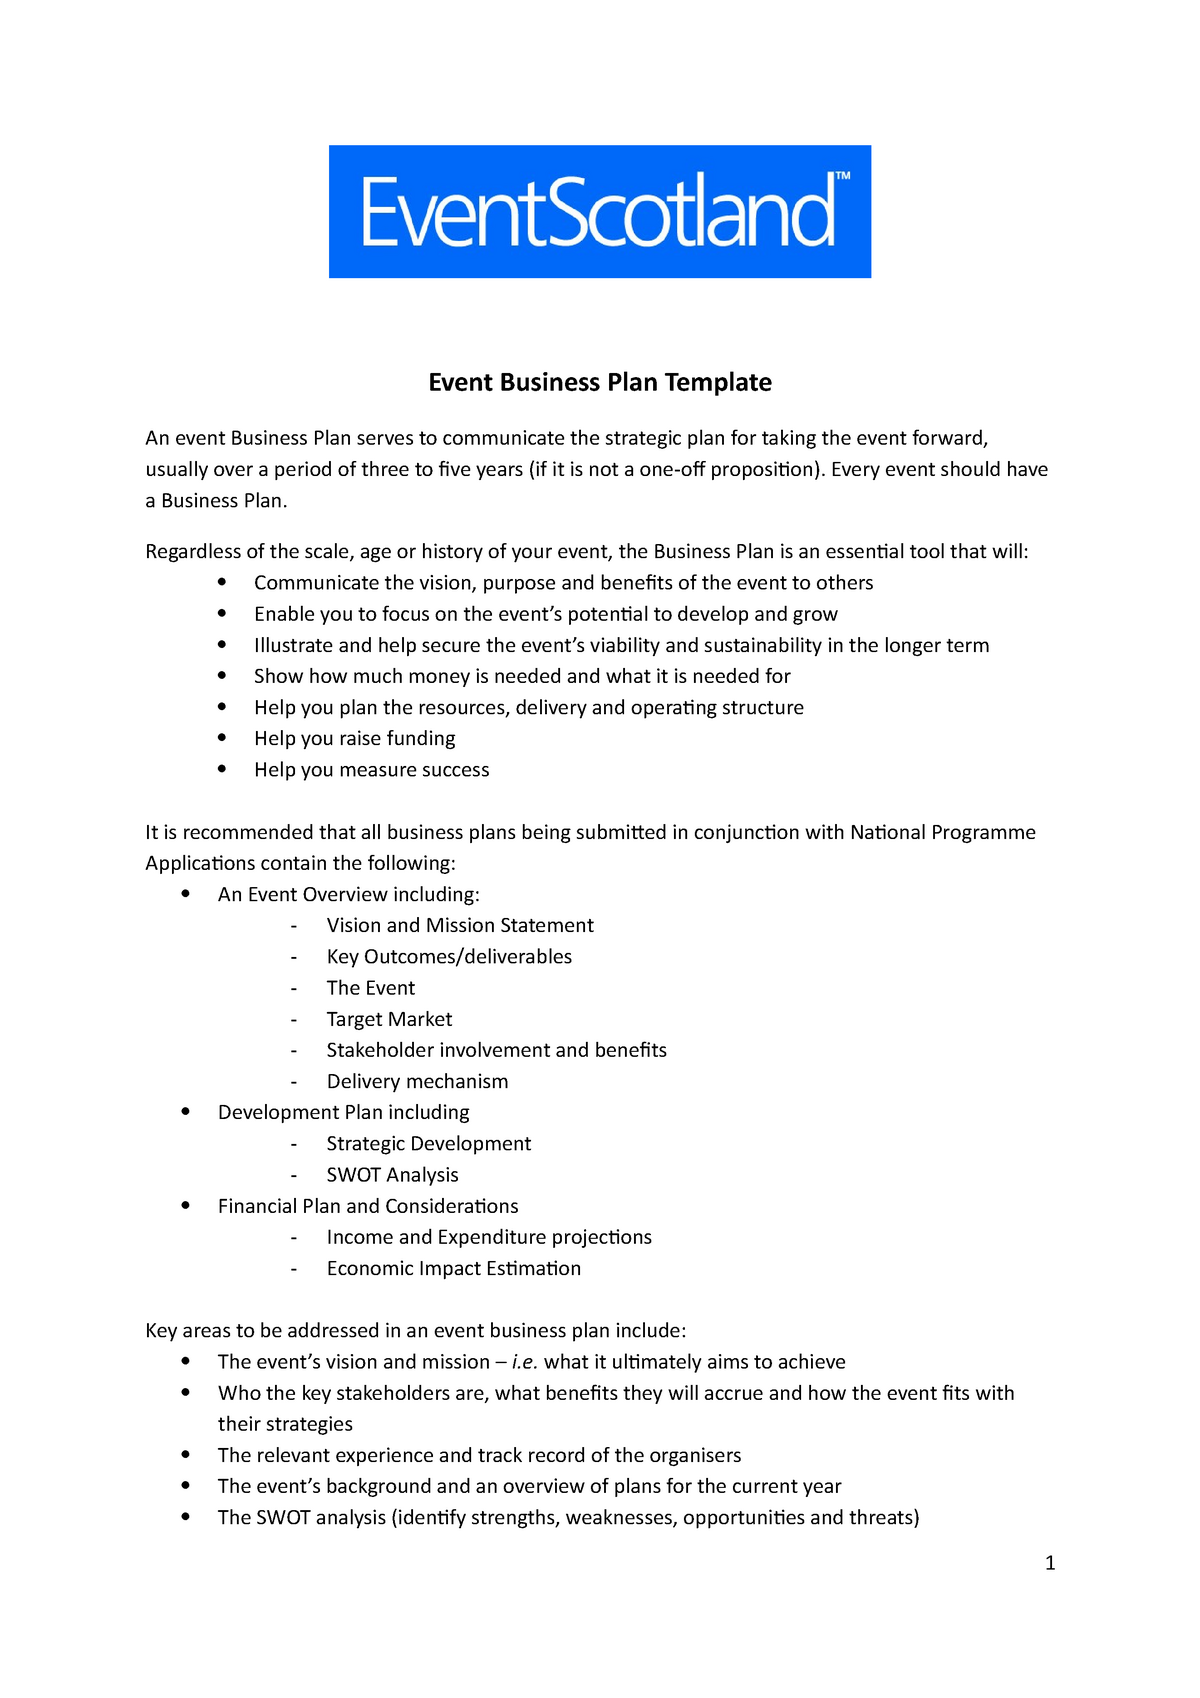 Event Business Plan Template - Every event should have a Business With Party Planning Business Plan Template